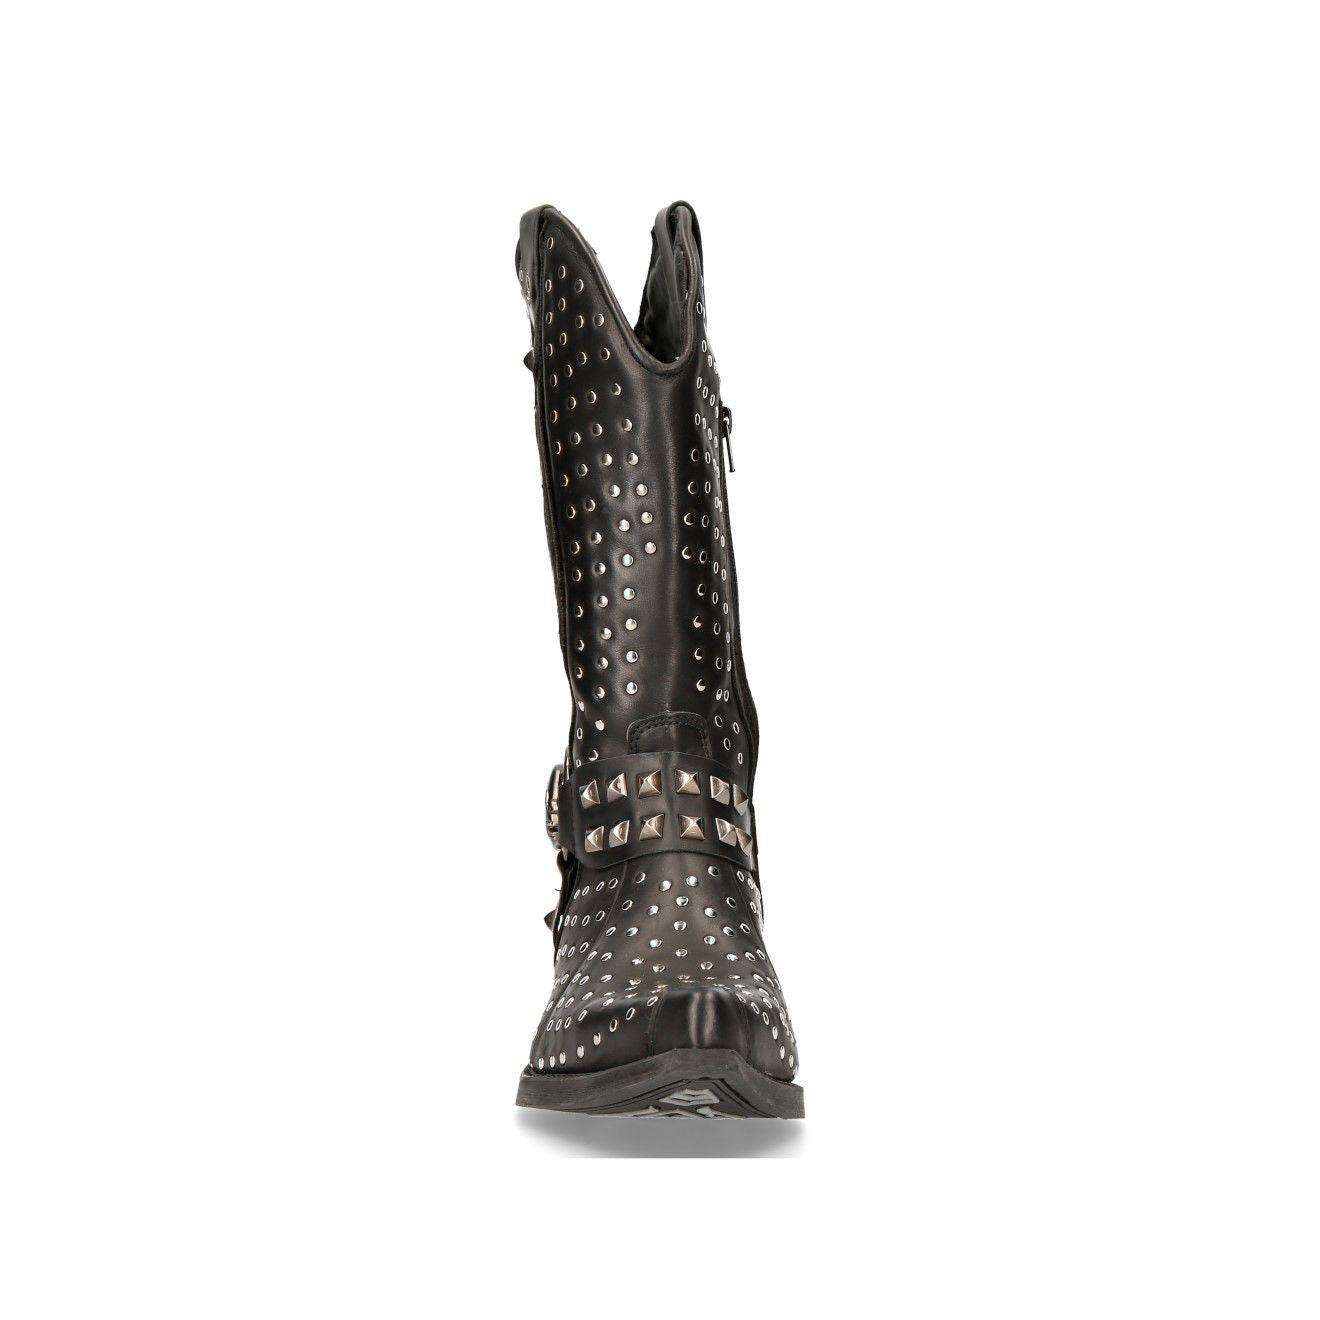 New Rock Black Leather Studded Cowboy Boots- M-7928-S1 - Upperclass Fashions 